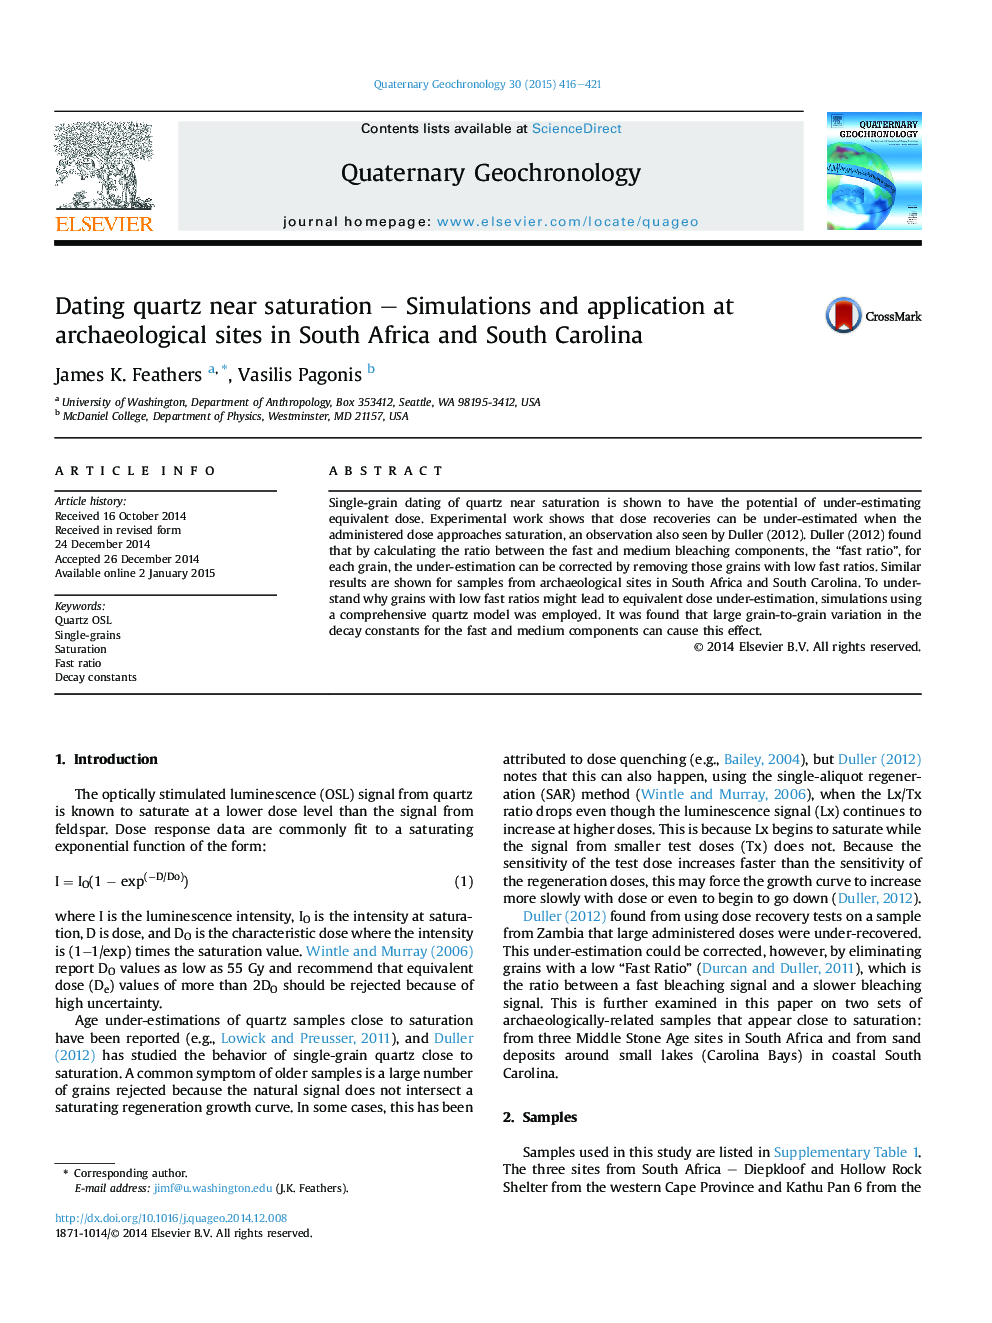 Dating quartz near saturation - Simulations and application at archaeological sites in South Africa and South Carolina